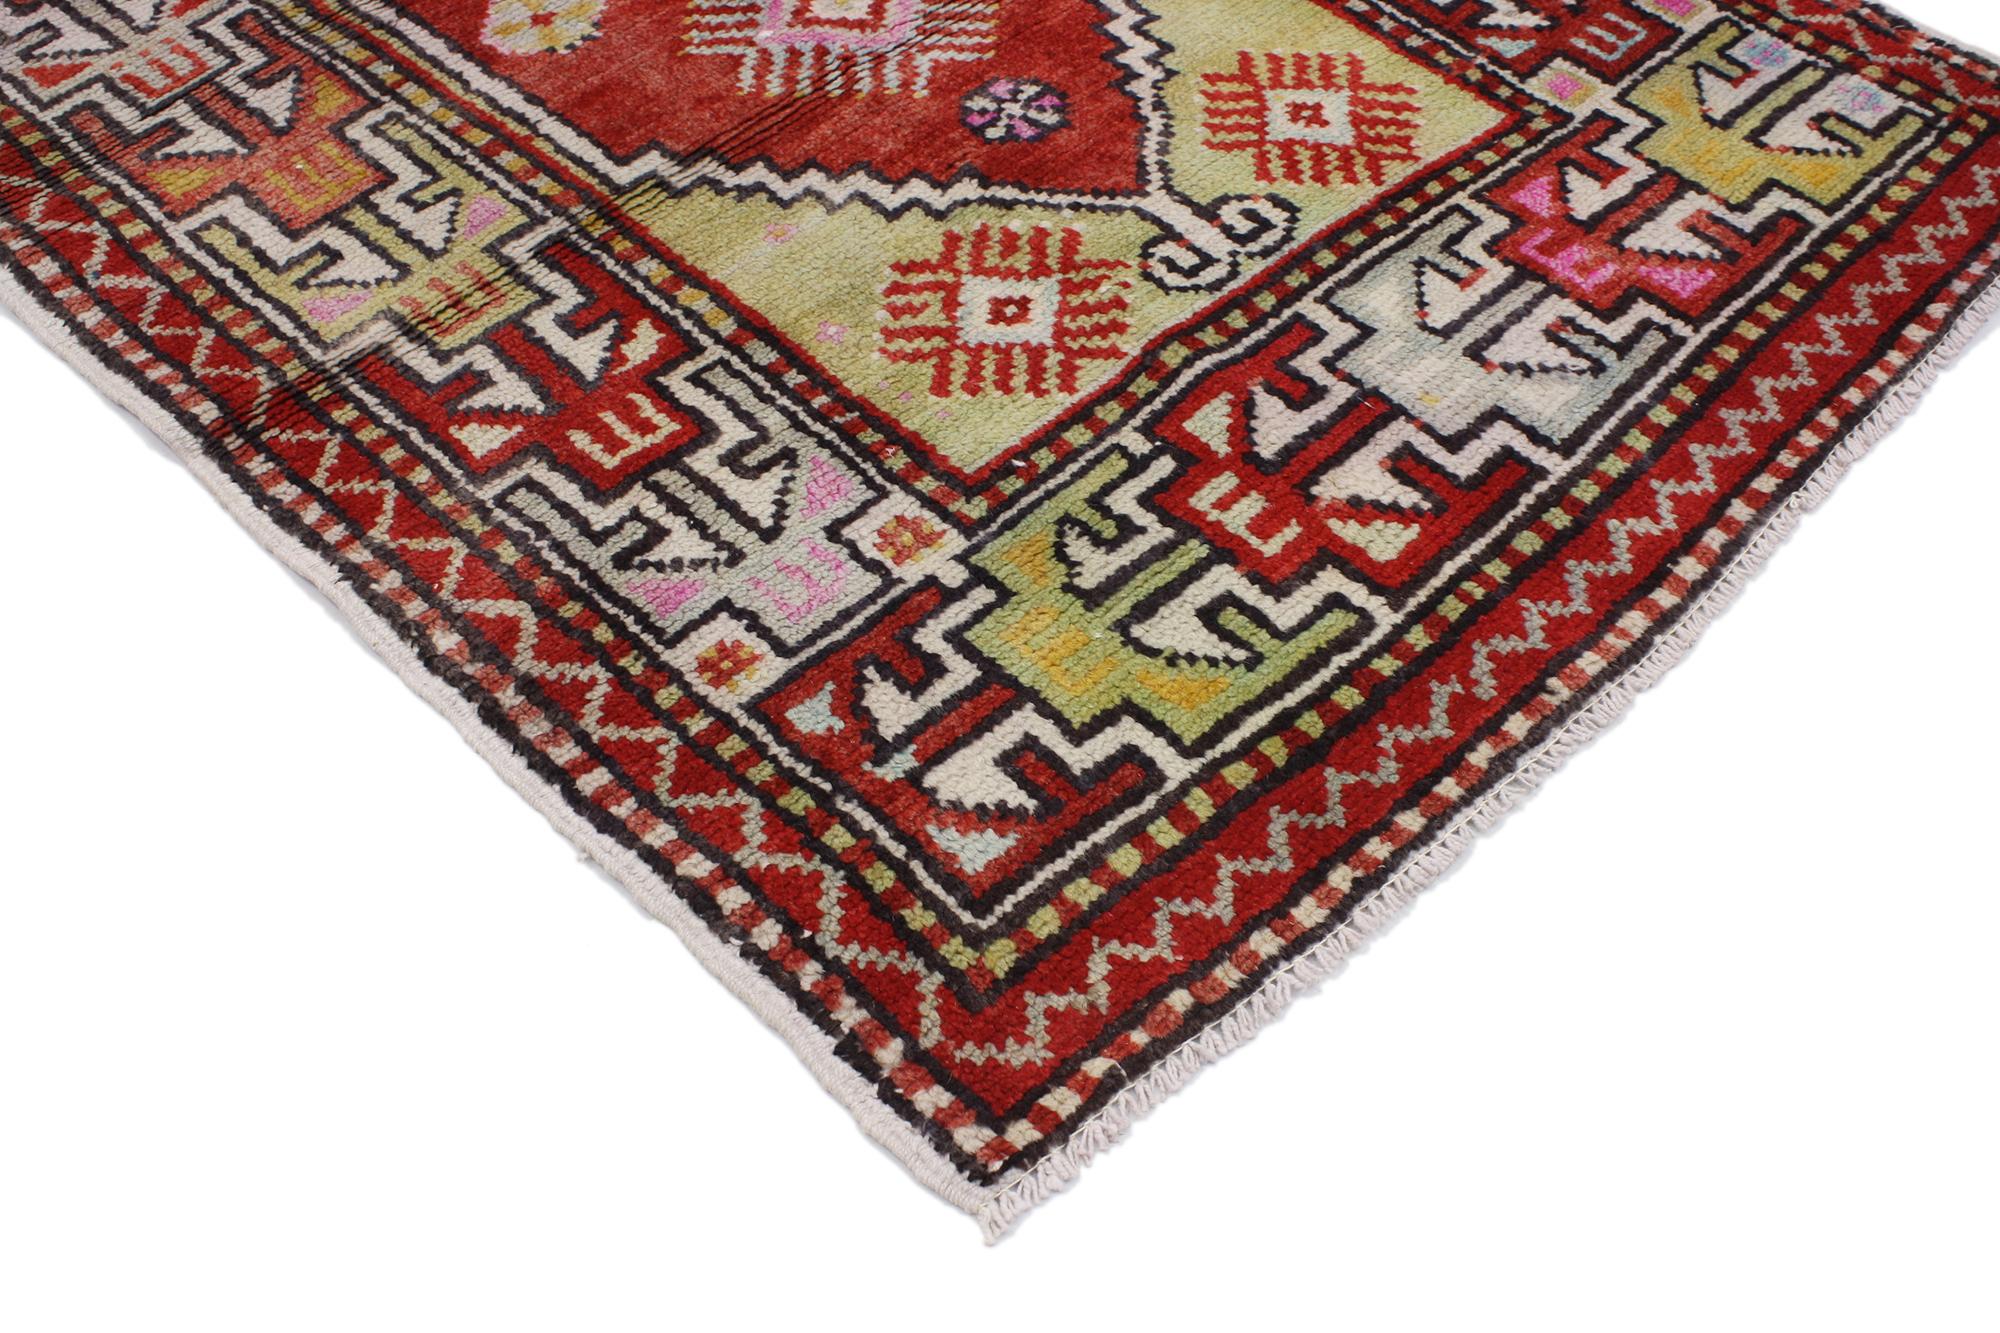 51753, vintage Turkish Oushak accent rug with color pop, Anatolian Yuntdag rug. This vintage Turkish Oushak rug features a modern traditional style. Immersed in Anatolian history and refined colors, this vintage Oushak rug combines simplicity with